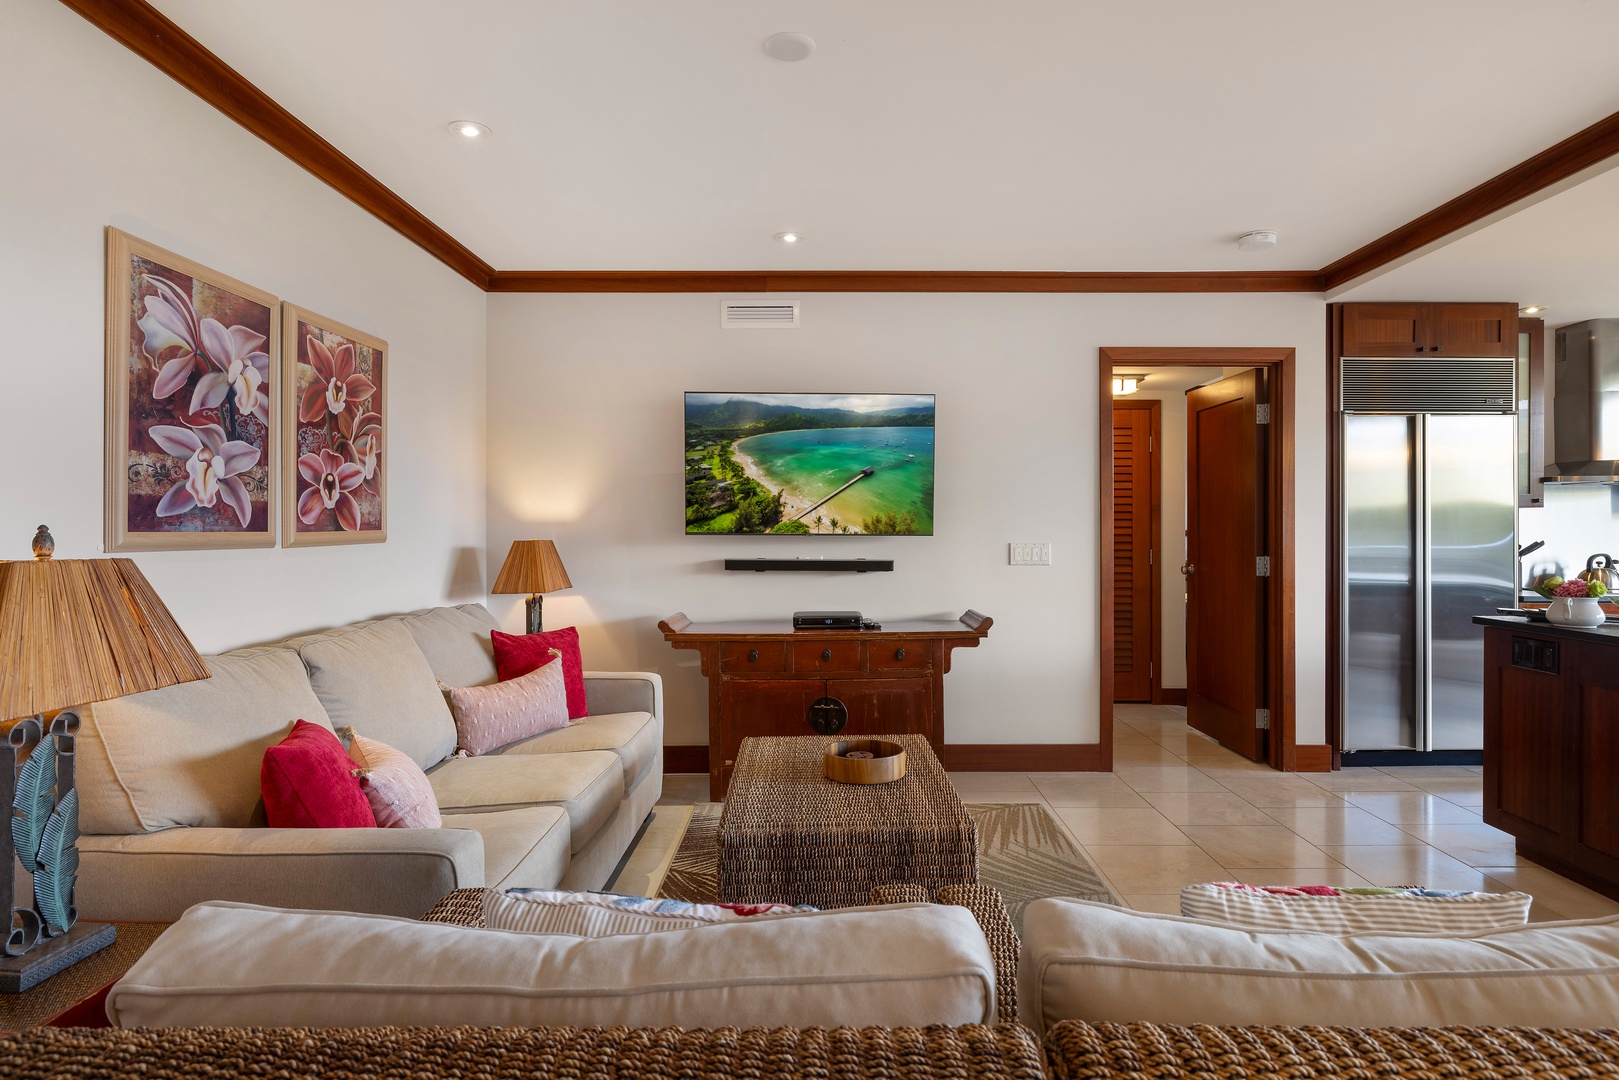 Kapolei Vacation Rentals, Ko Olina Beach Villas B506 - The warm tones and decor are inviting and elegantly appointed in the living area.